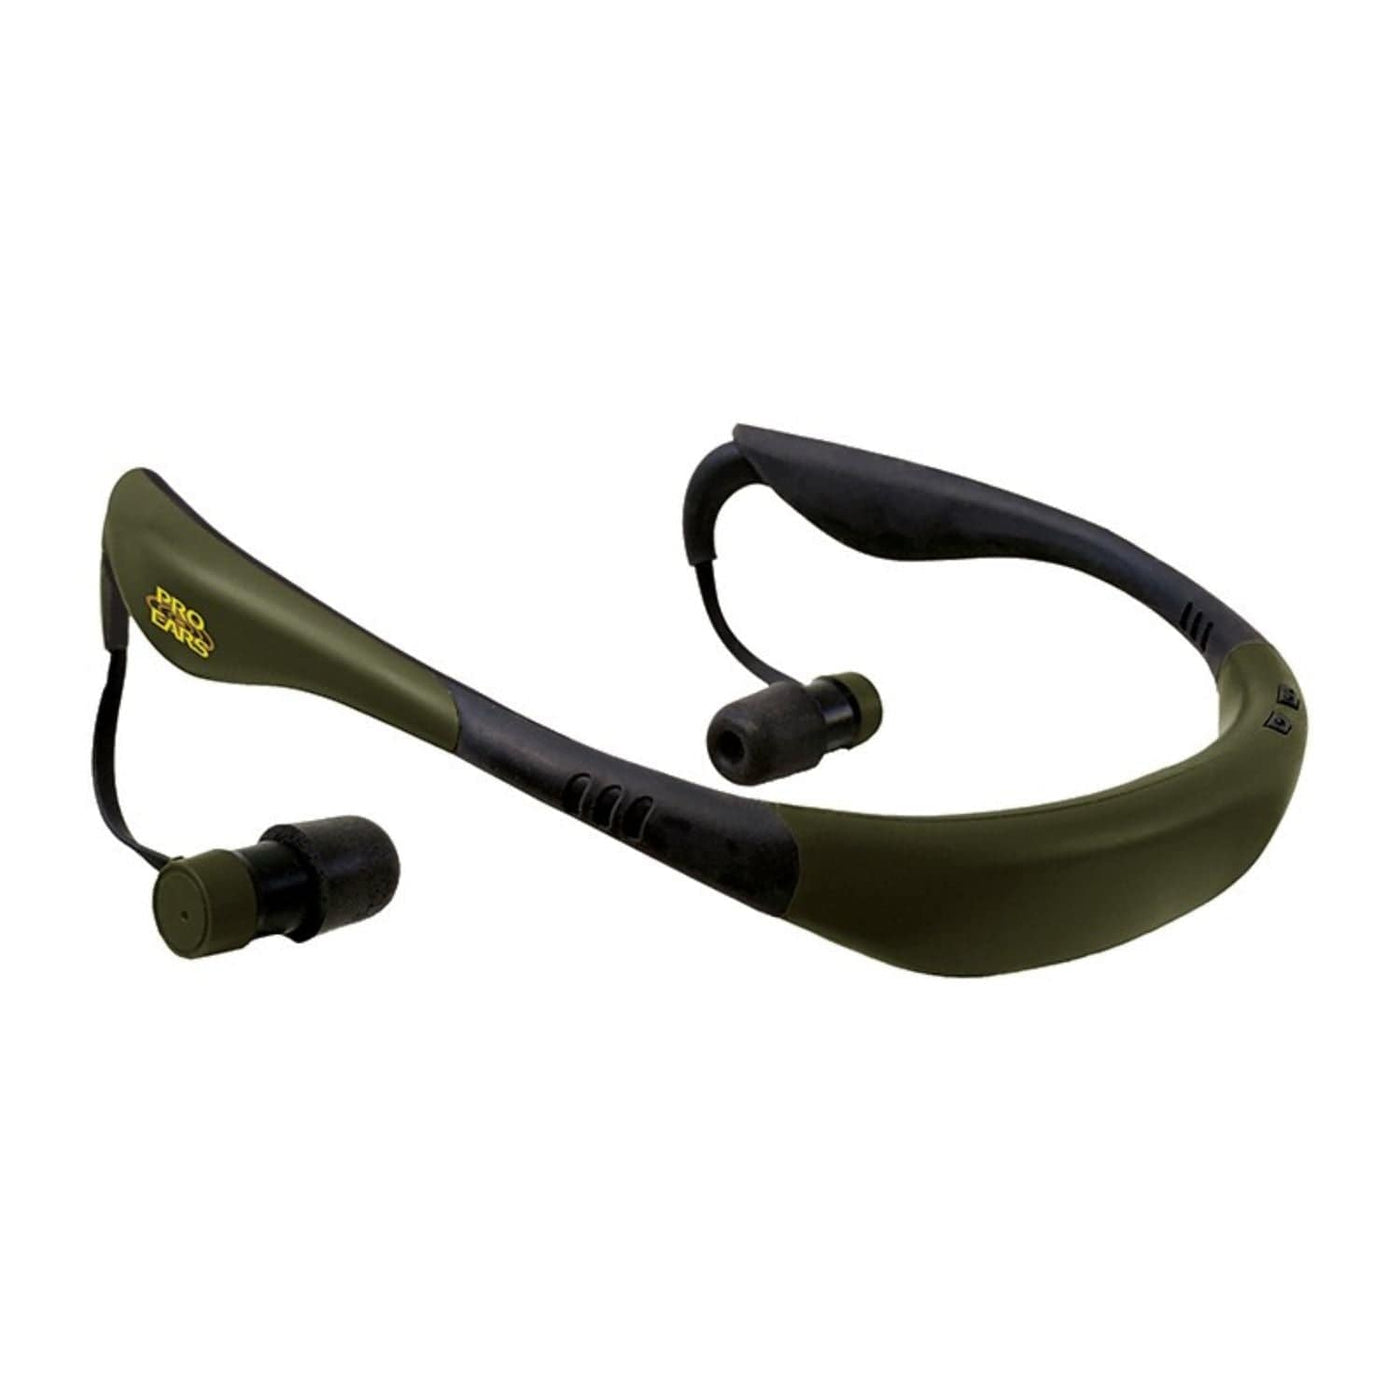 Pro Ears Pro Ears Stealth 28 Hearing Protection and Amplification Grn Shooting